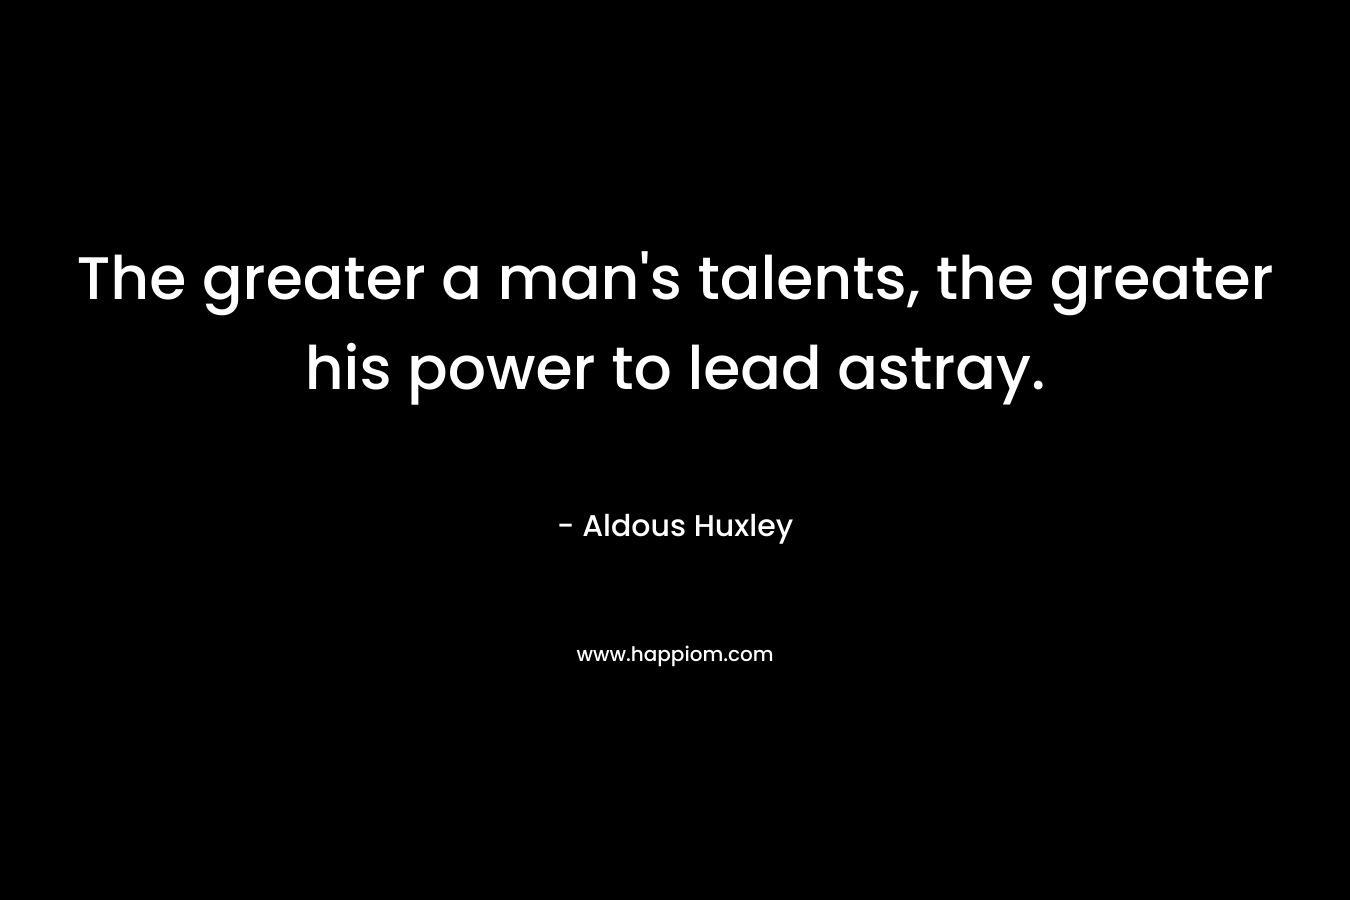 The greater a man’s talents, the greater his power to lead astray. – Aldous Huxley